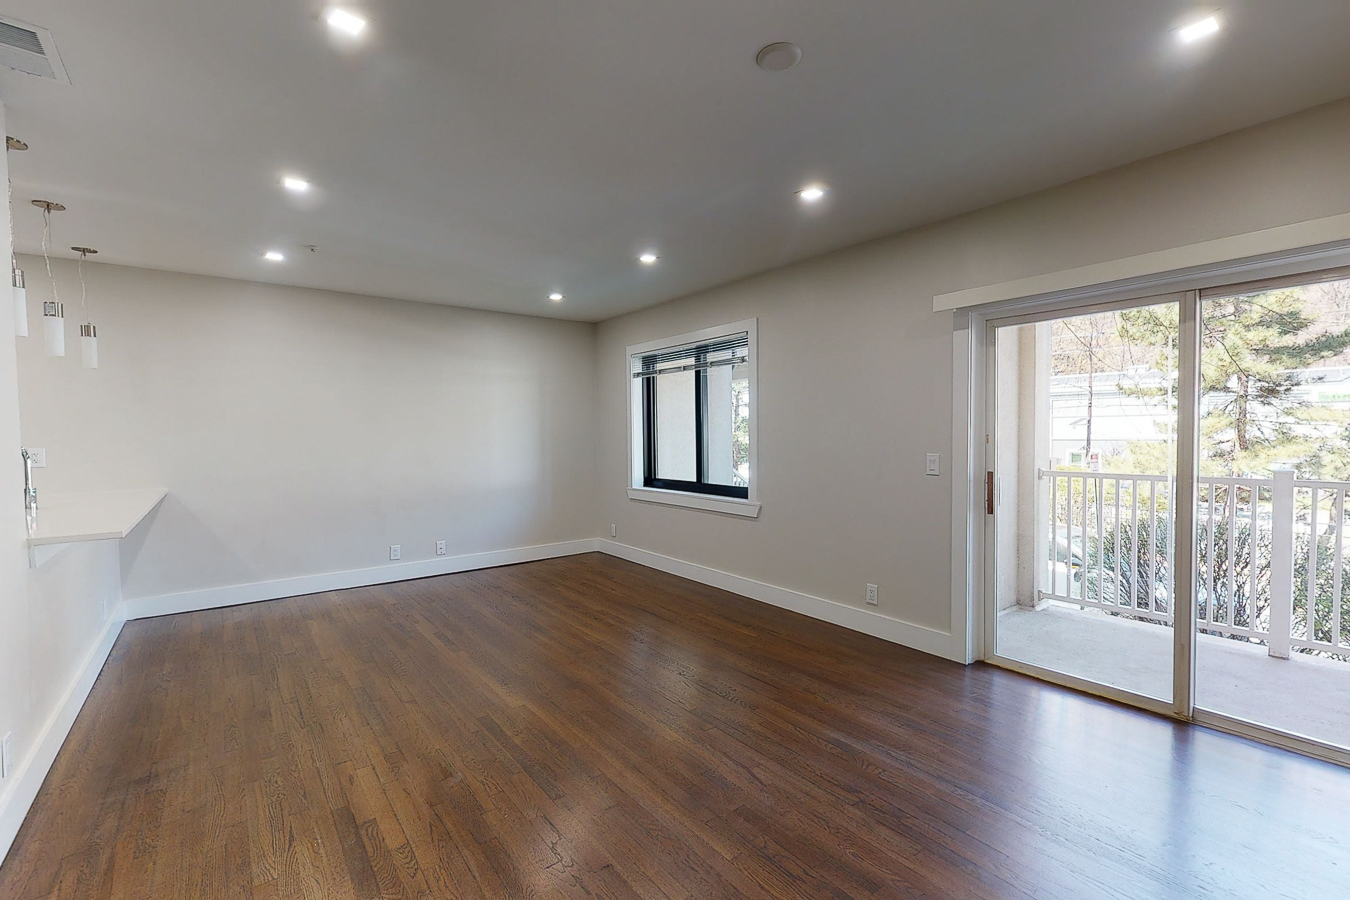 Photo Gallery of River Club Apartments in Edgewater NJ